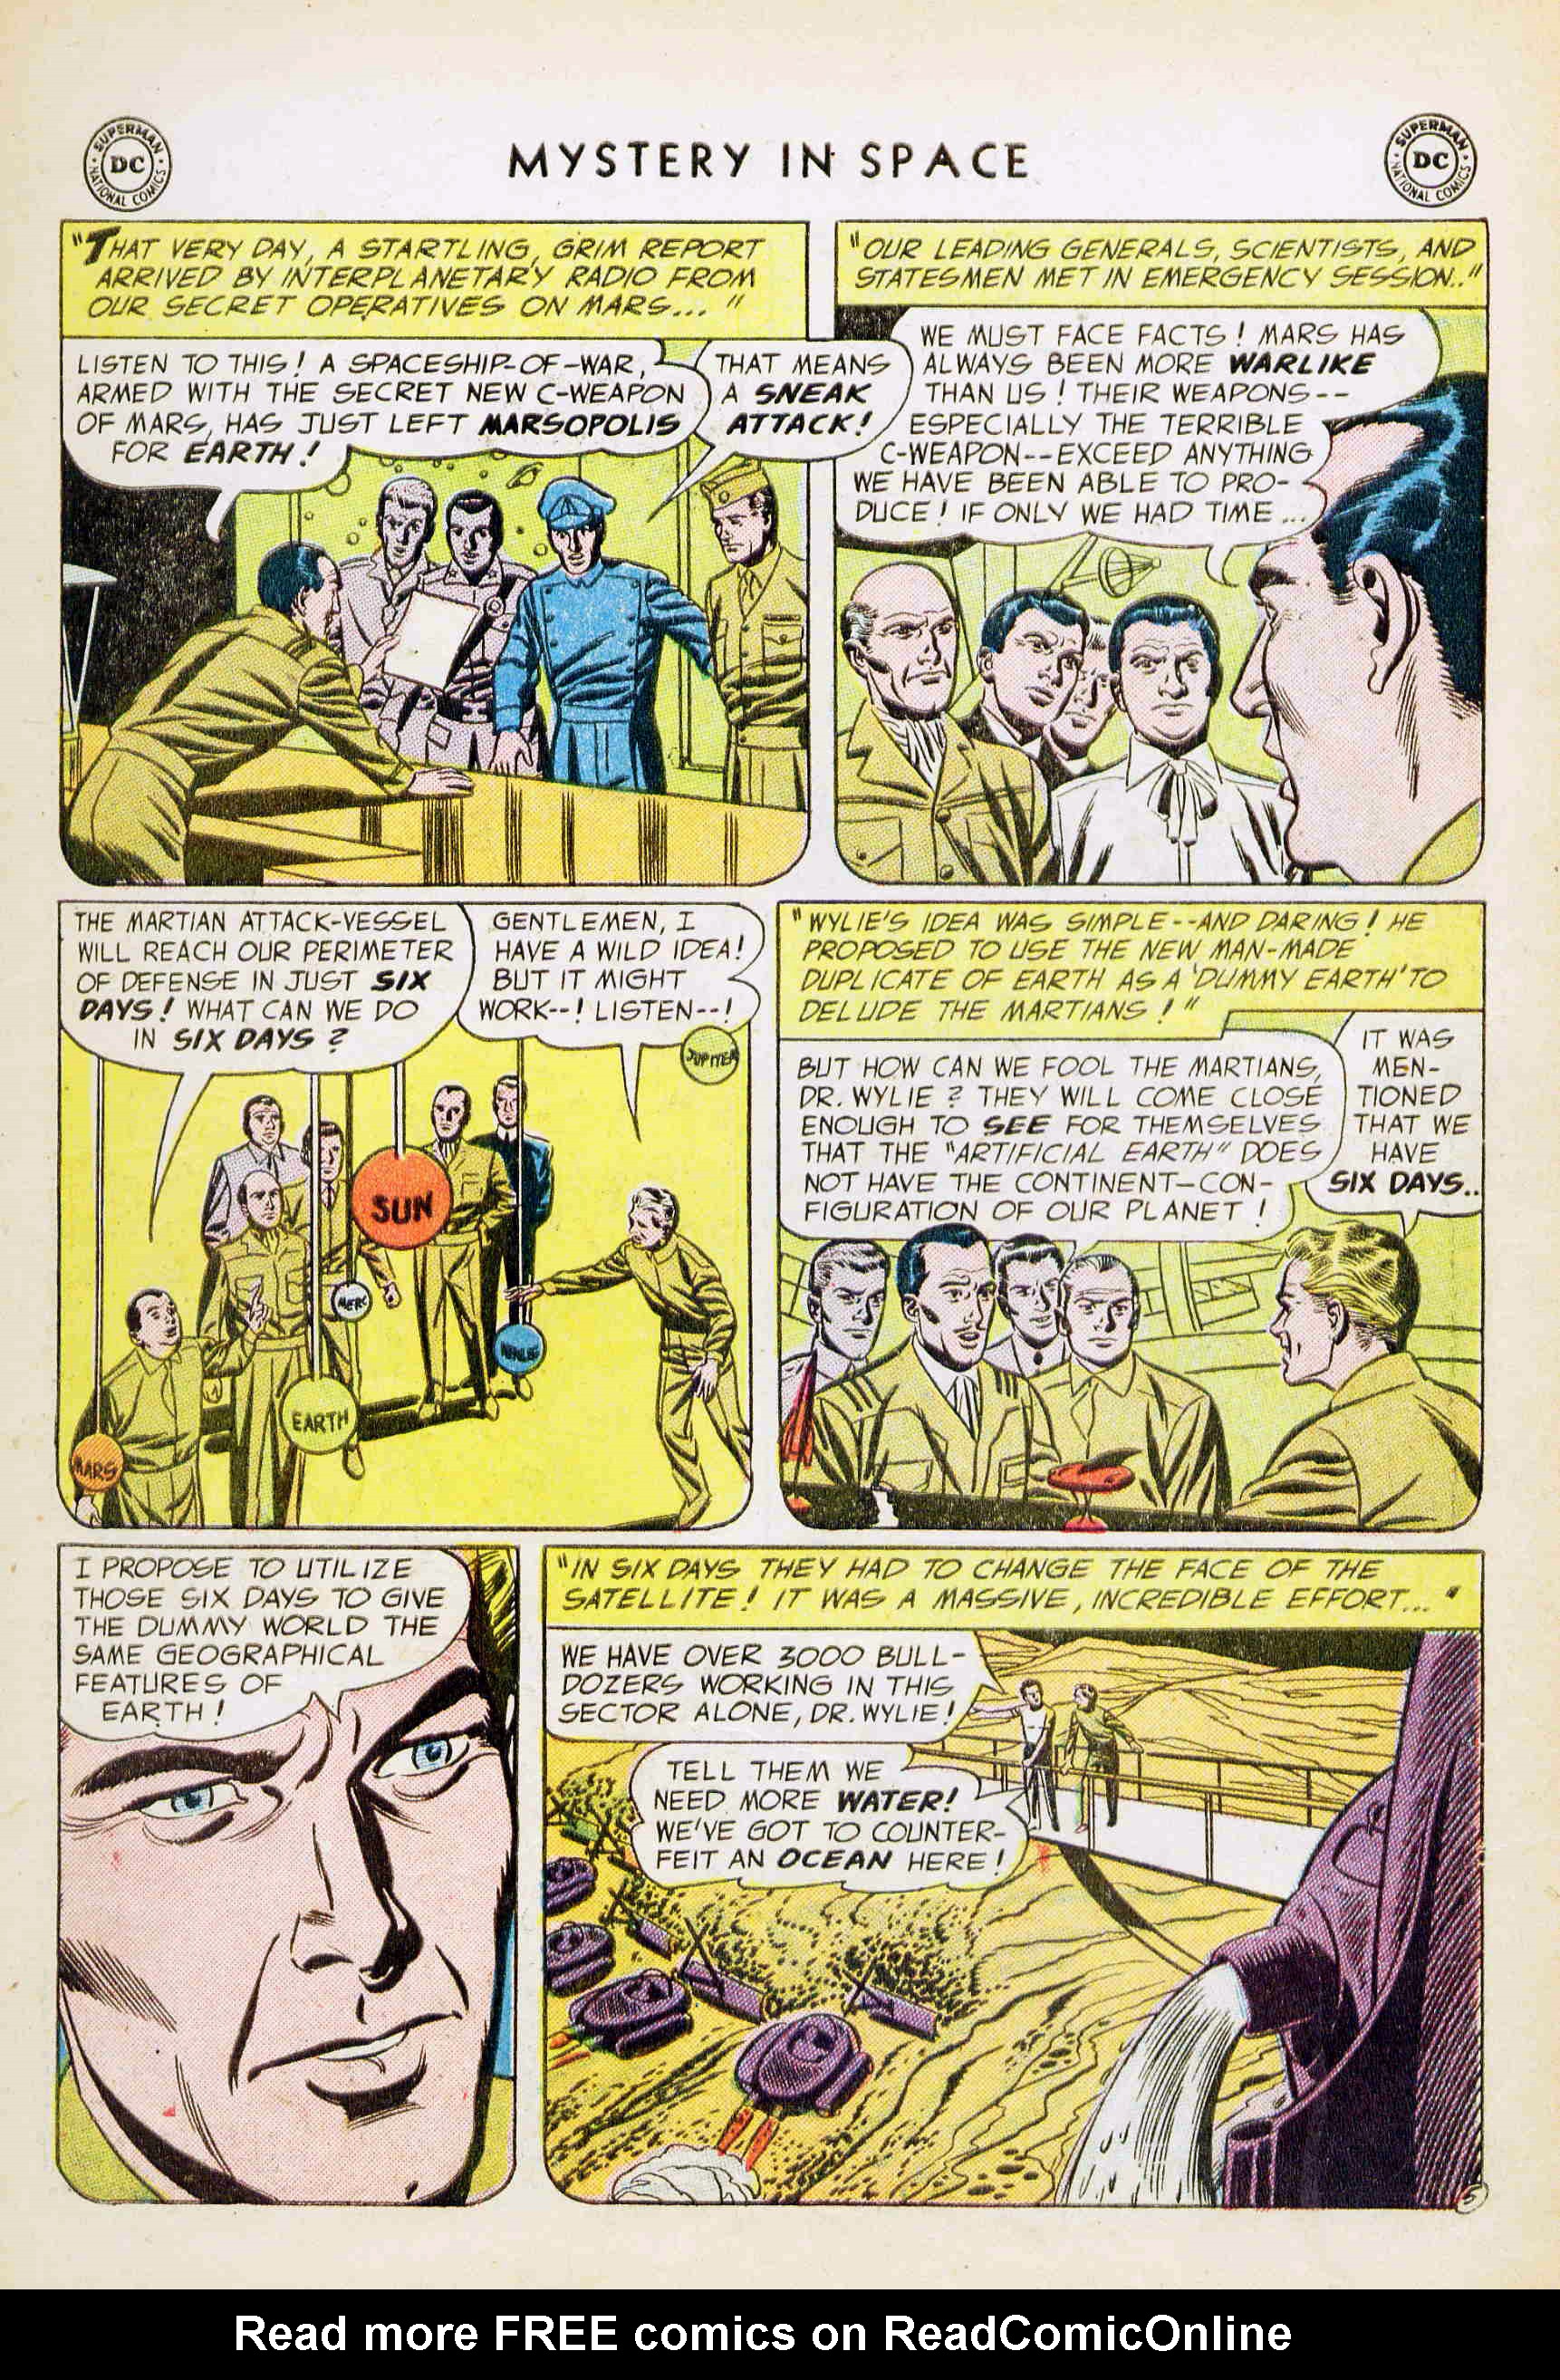 Mystery in Space (1951) 26 Page 6